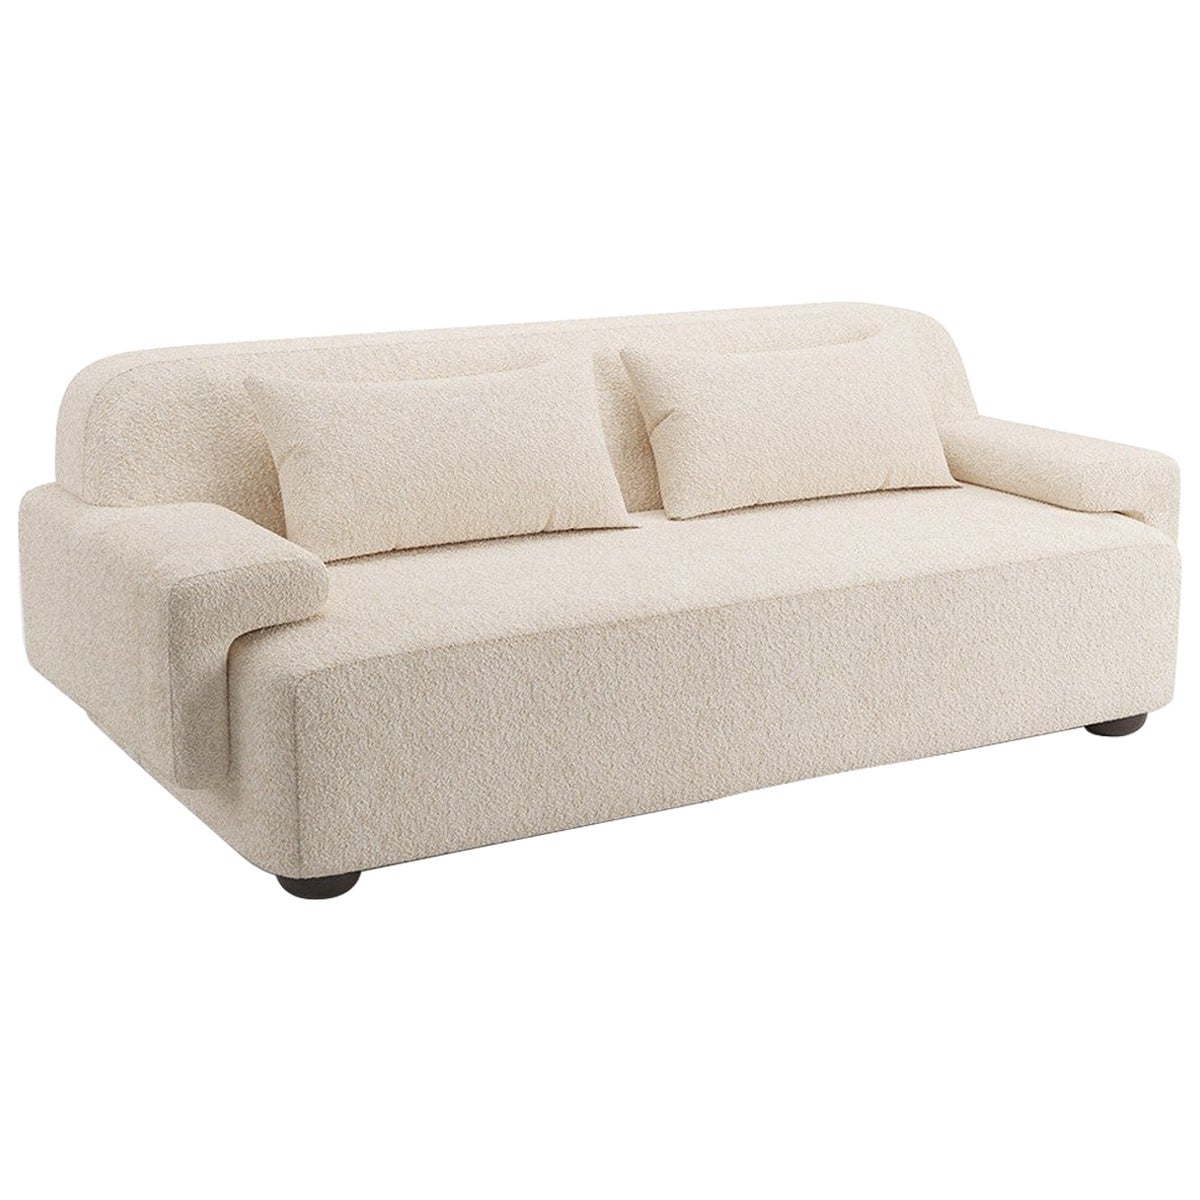 Popus Editions Lena 4 Seater Sofa in Natural Athena Loop Yarn Upholstery For Sale